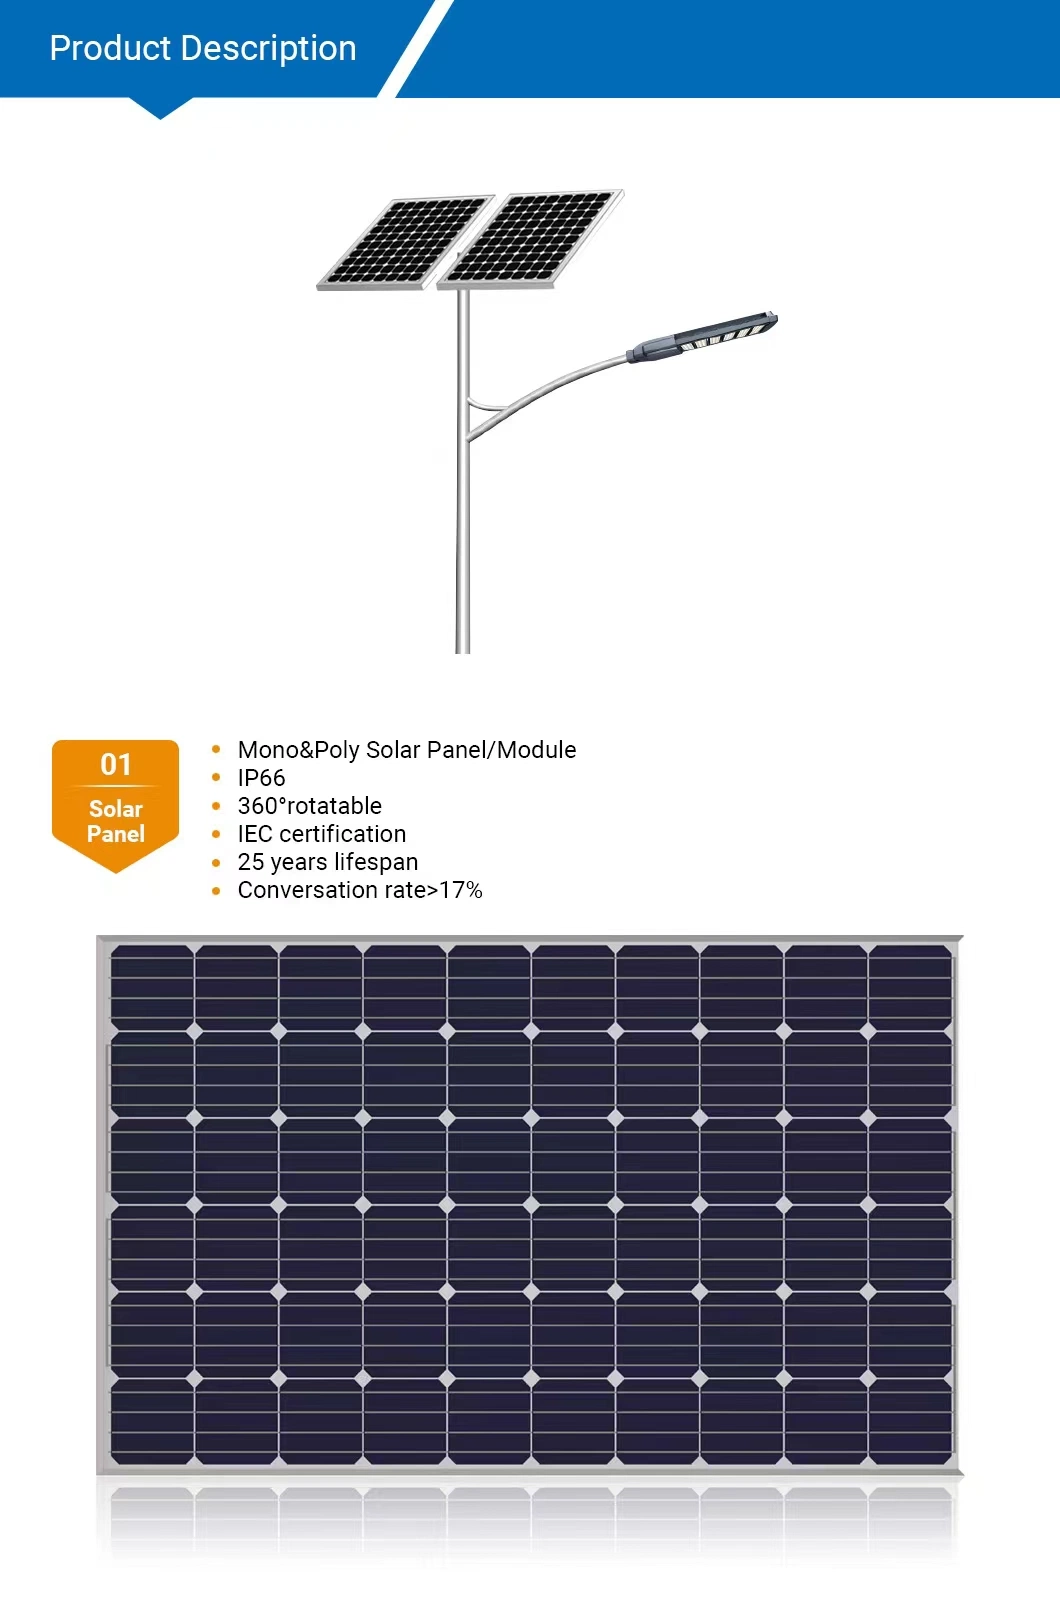 Public Places Such as Roads and Rural Construction Use Solar Street Lights